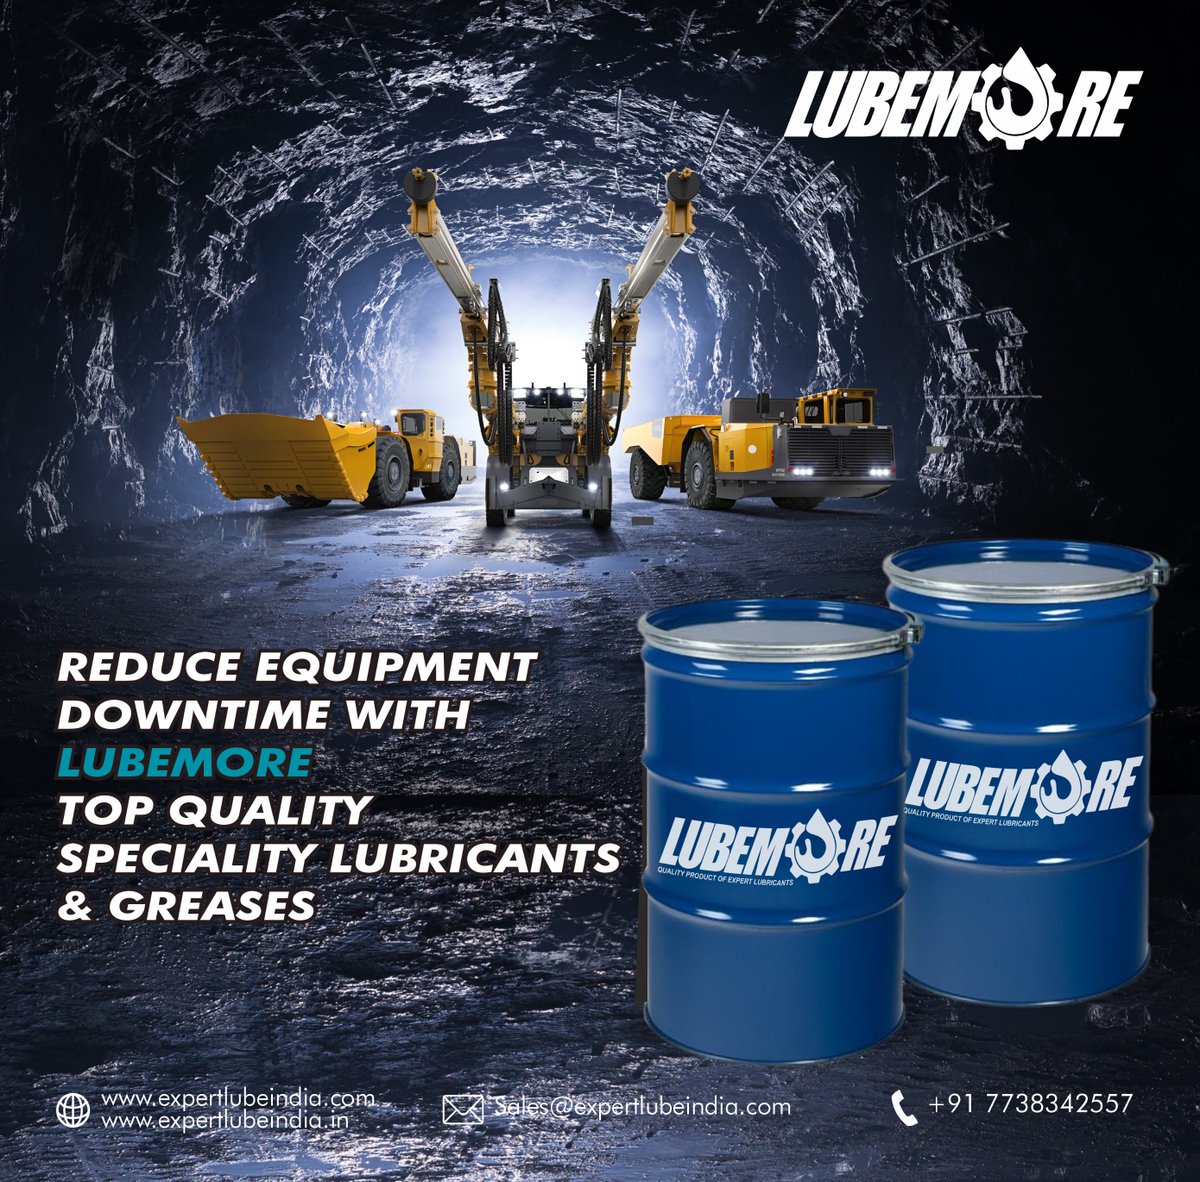 LUBEMORE specialty lubricants and greases are designed to protect your machinery and equipment in tough and dusty conditions. Contact us now for more
#lubemore #expertlubricants #offhighway #protect #specialitylubricants #greases #engineoil #transmissionoil #hydraulicoil